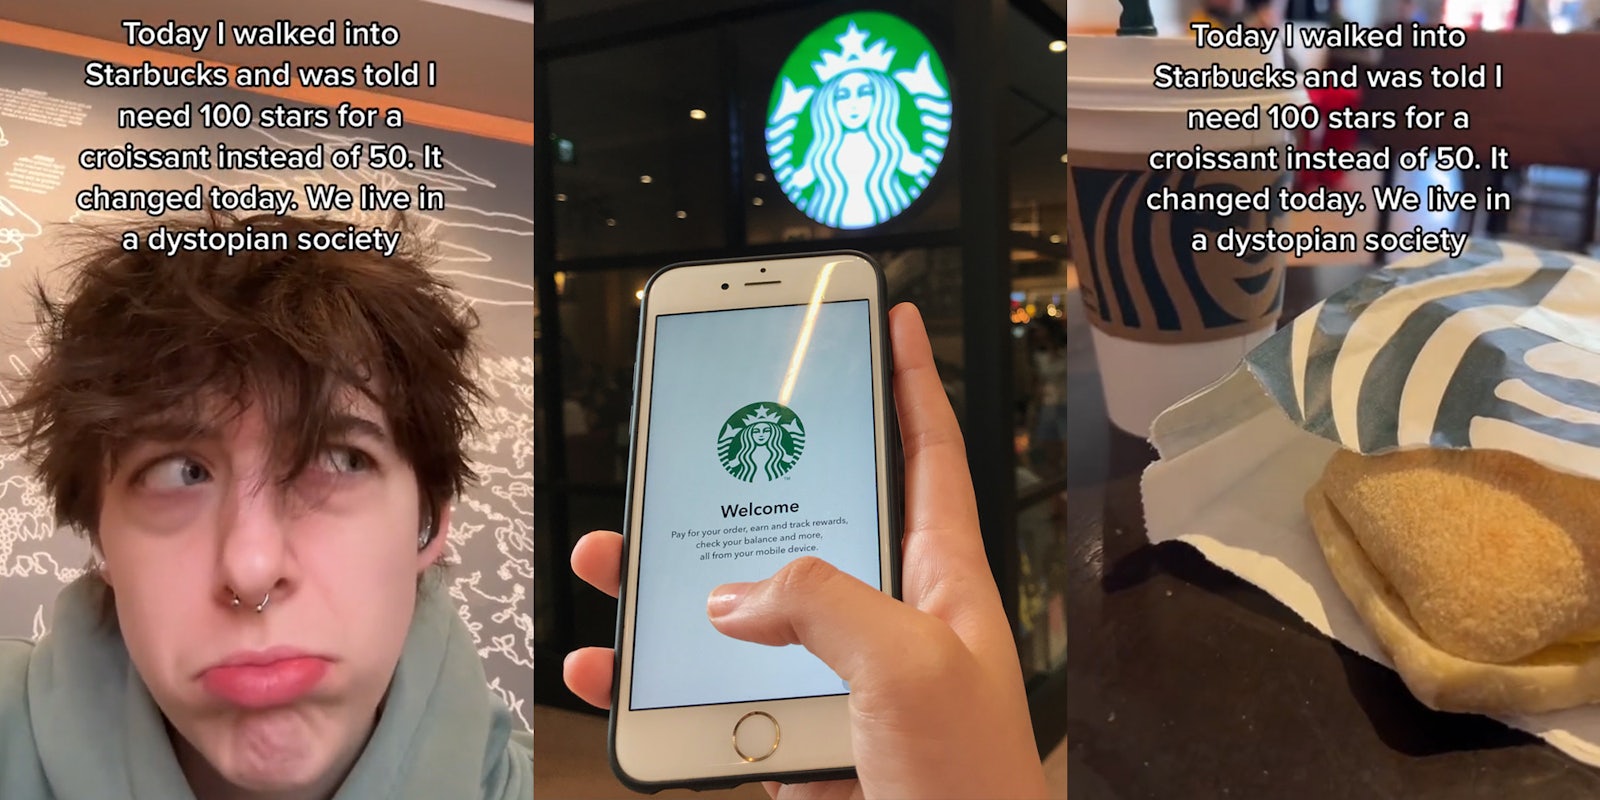 Starbucks customer with sad face and caption 'Today I walked into Starbucks and was told I need 100 stars for a croissant instead of 50. We live in a dystopian society' (l) person holding phone with Starbucks app on screen in front of Starbucks sign (c) Starbucks drink and croissant with caption 'Today I walked into Starbucks and was told I need 100 stars for a croissant instead of 50. We live in a dystopian society' (r)